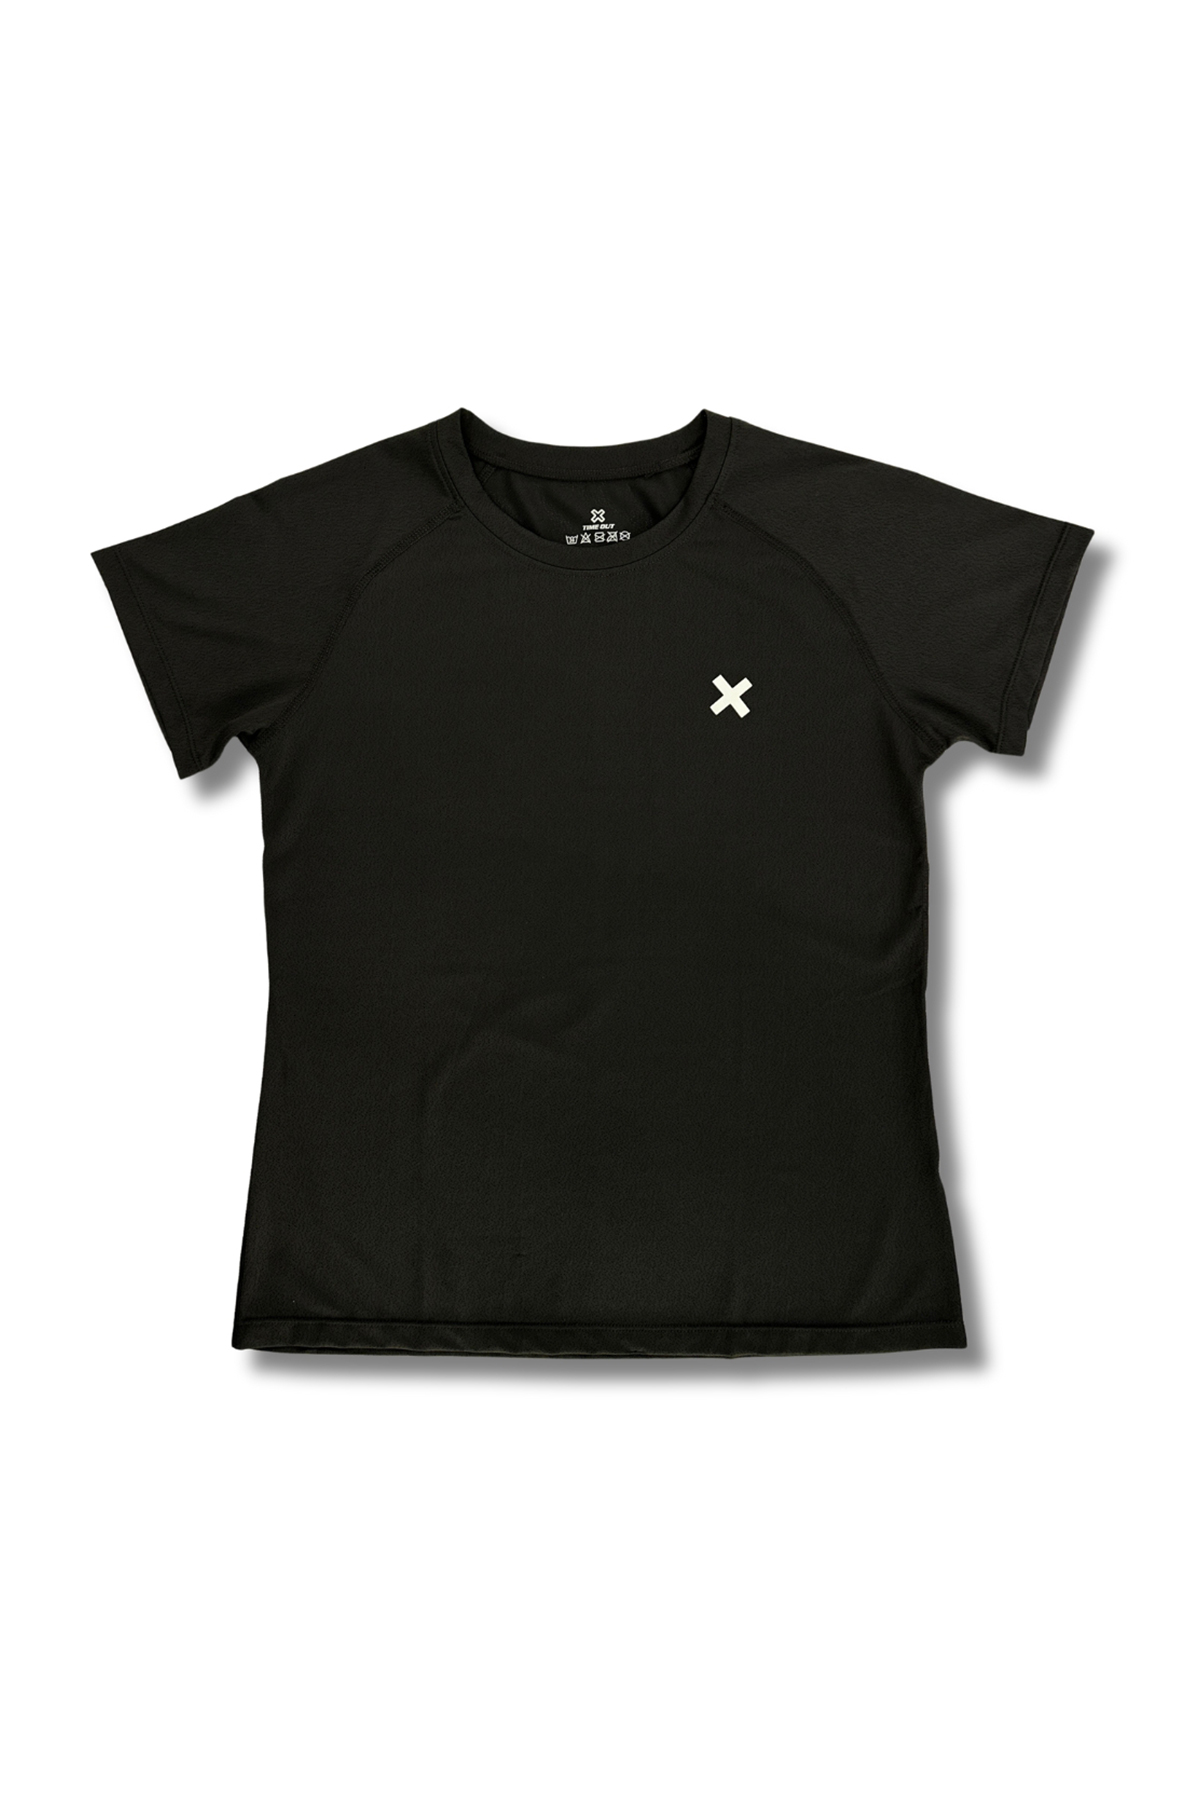 Time-Out-X-Women’s-Quick-drying-Gym-T-shirt-black-front